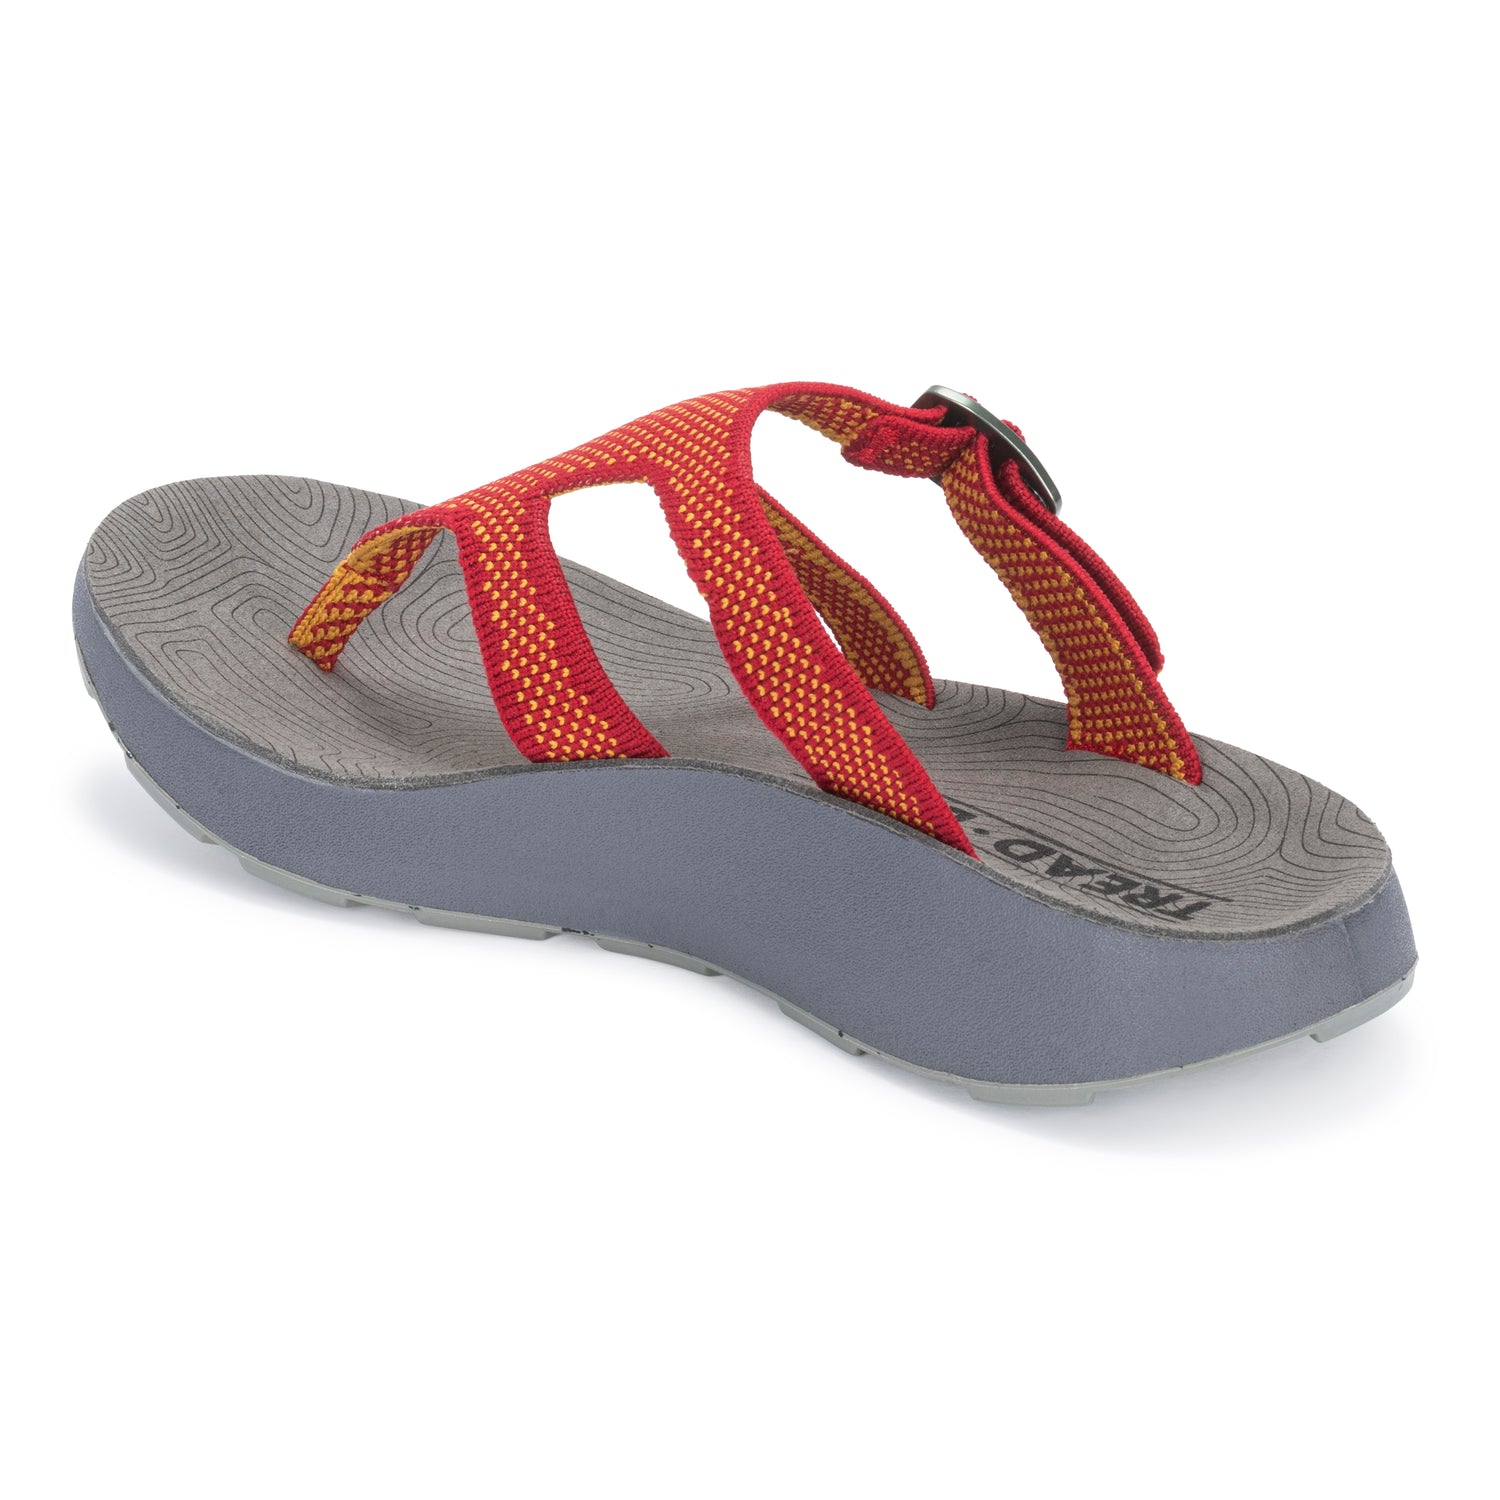 Women's Covelo Sandal with Arch Support in Fire Red